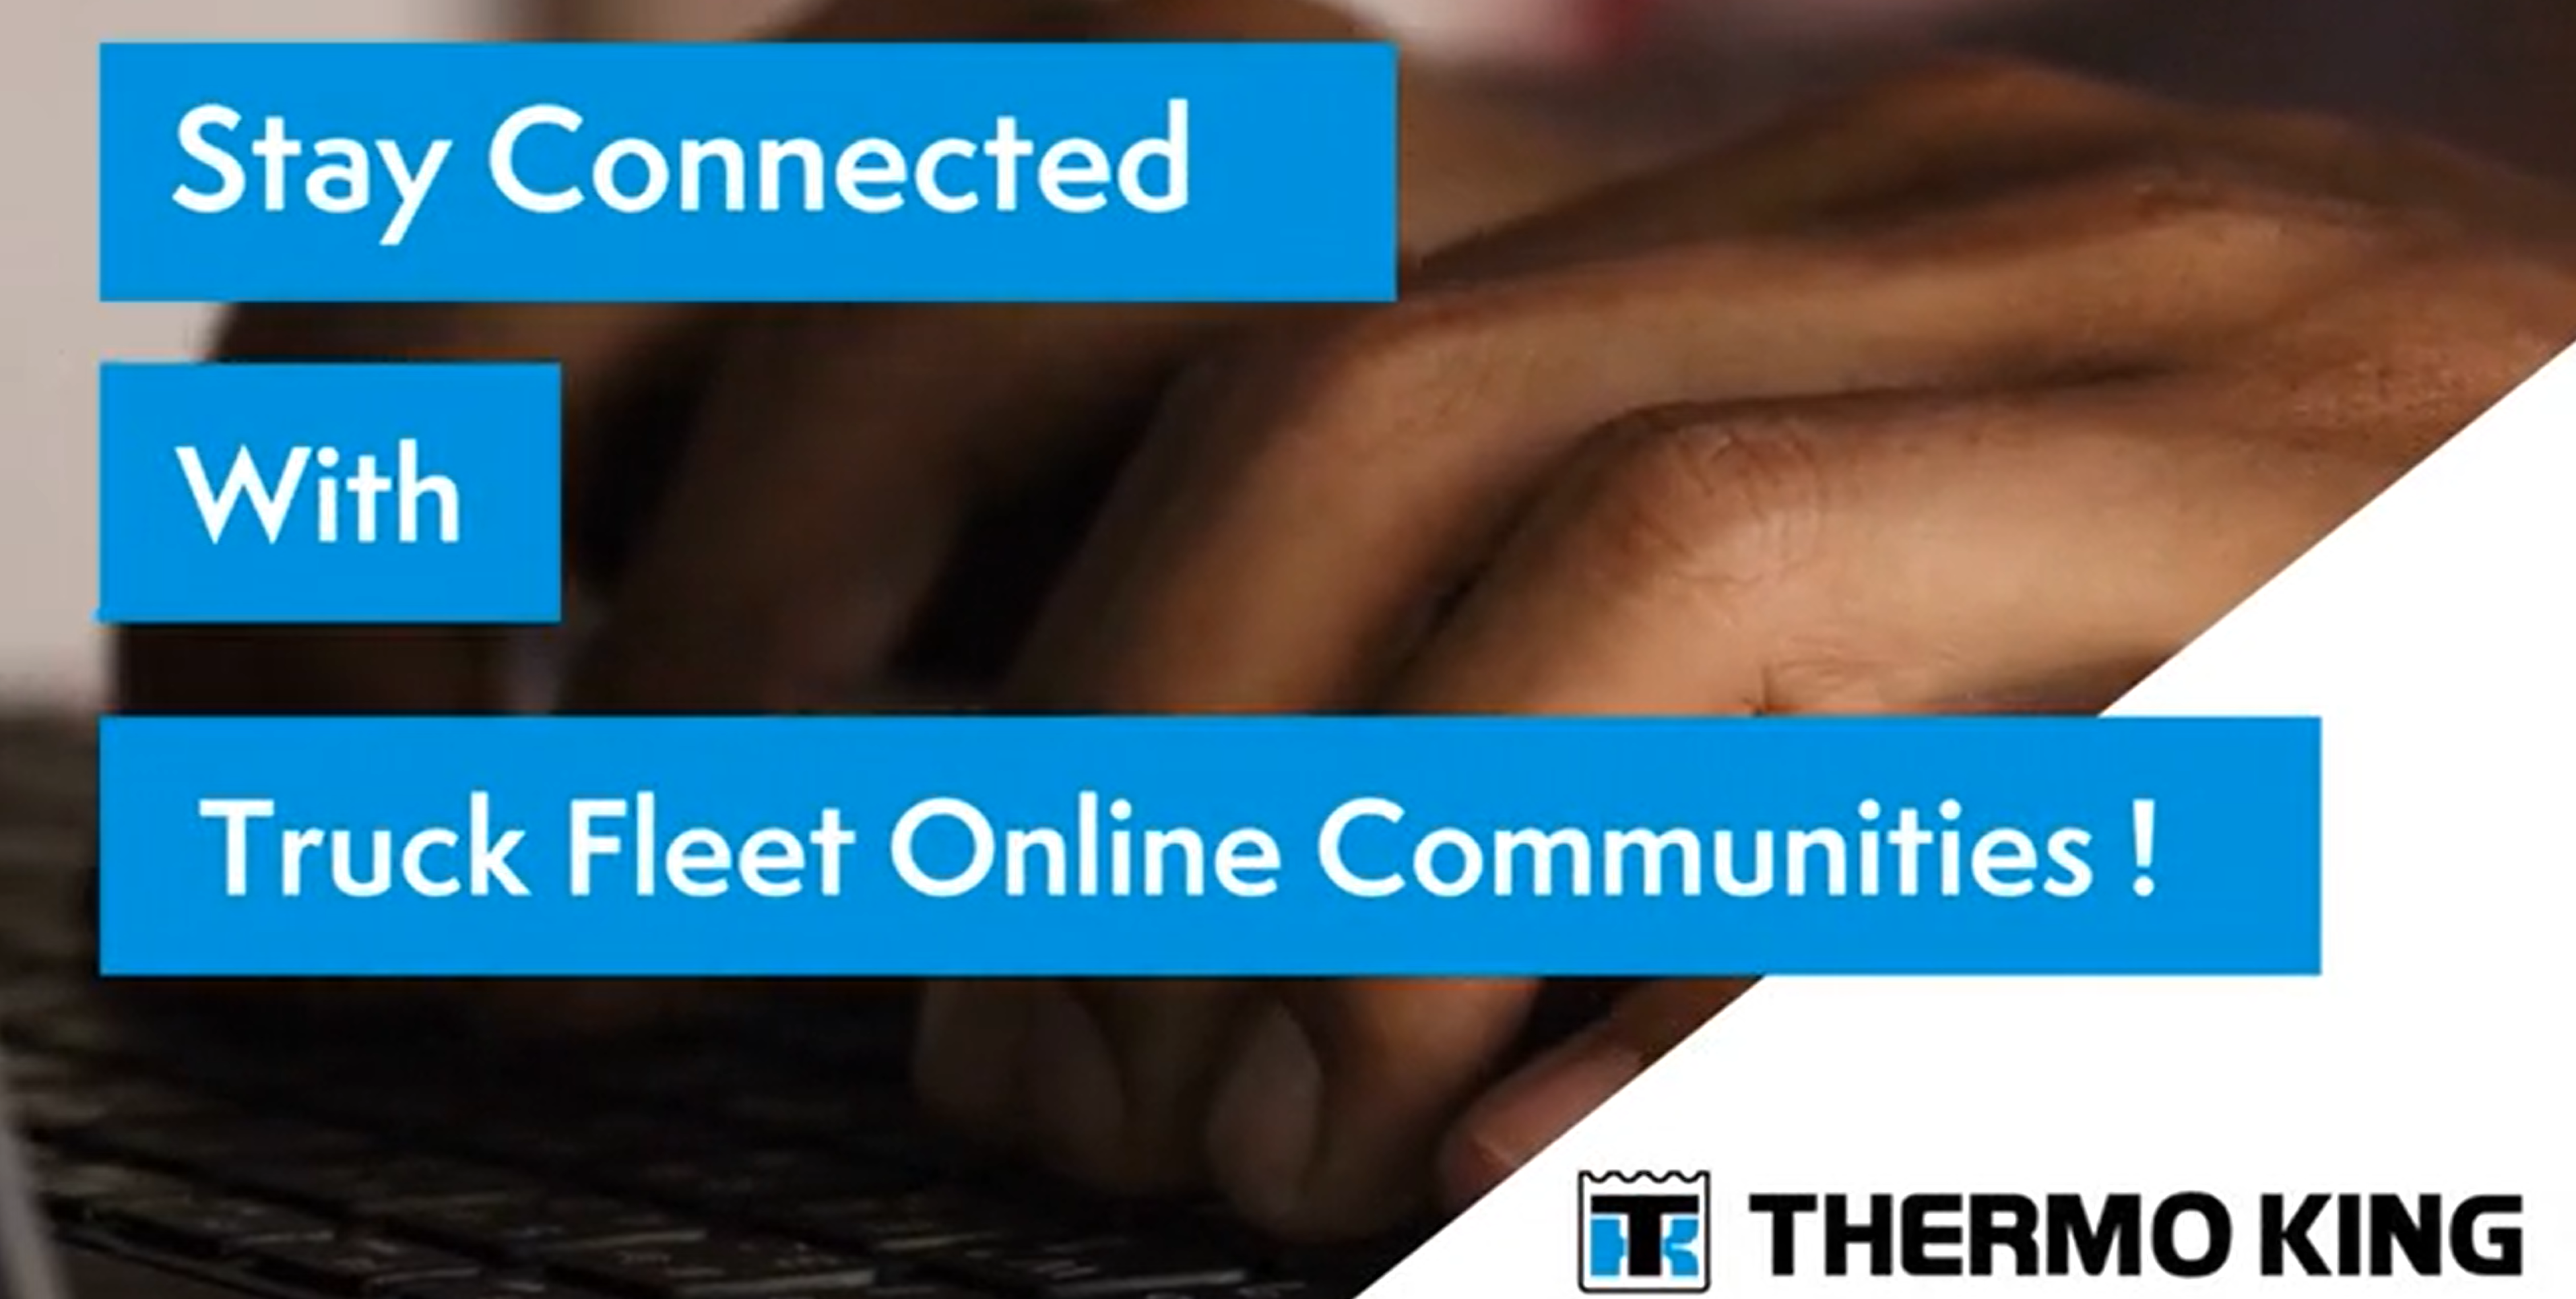 Stay connected with truck fleet online communities for transitioning to electric fleets